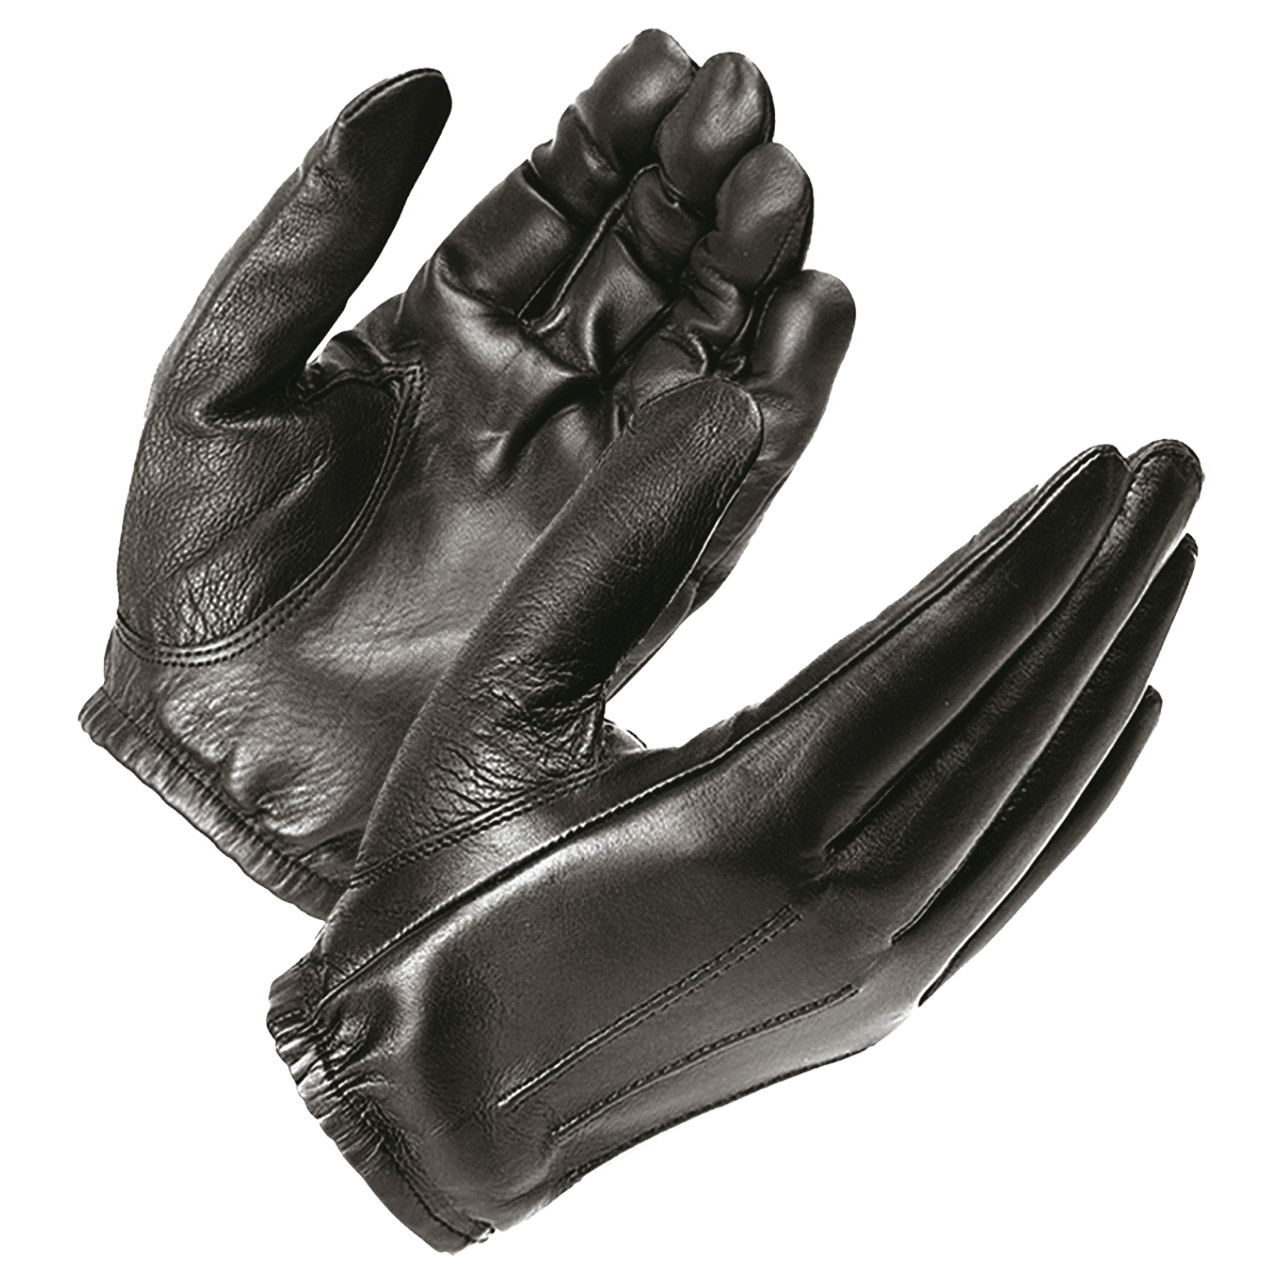 Men Police Search Driving Gloves Great Dexterity Strong Grip Thin Leather  Fit